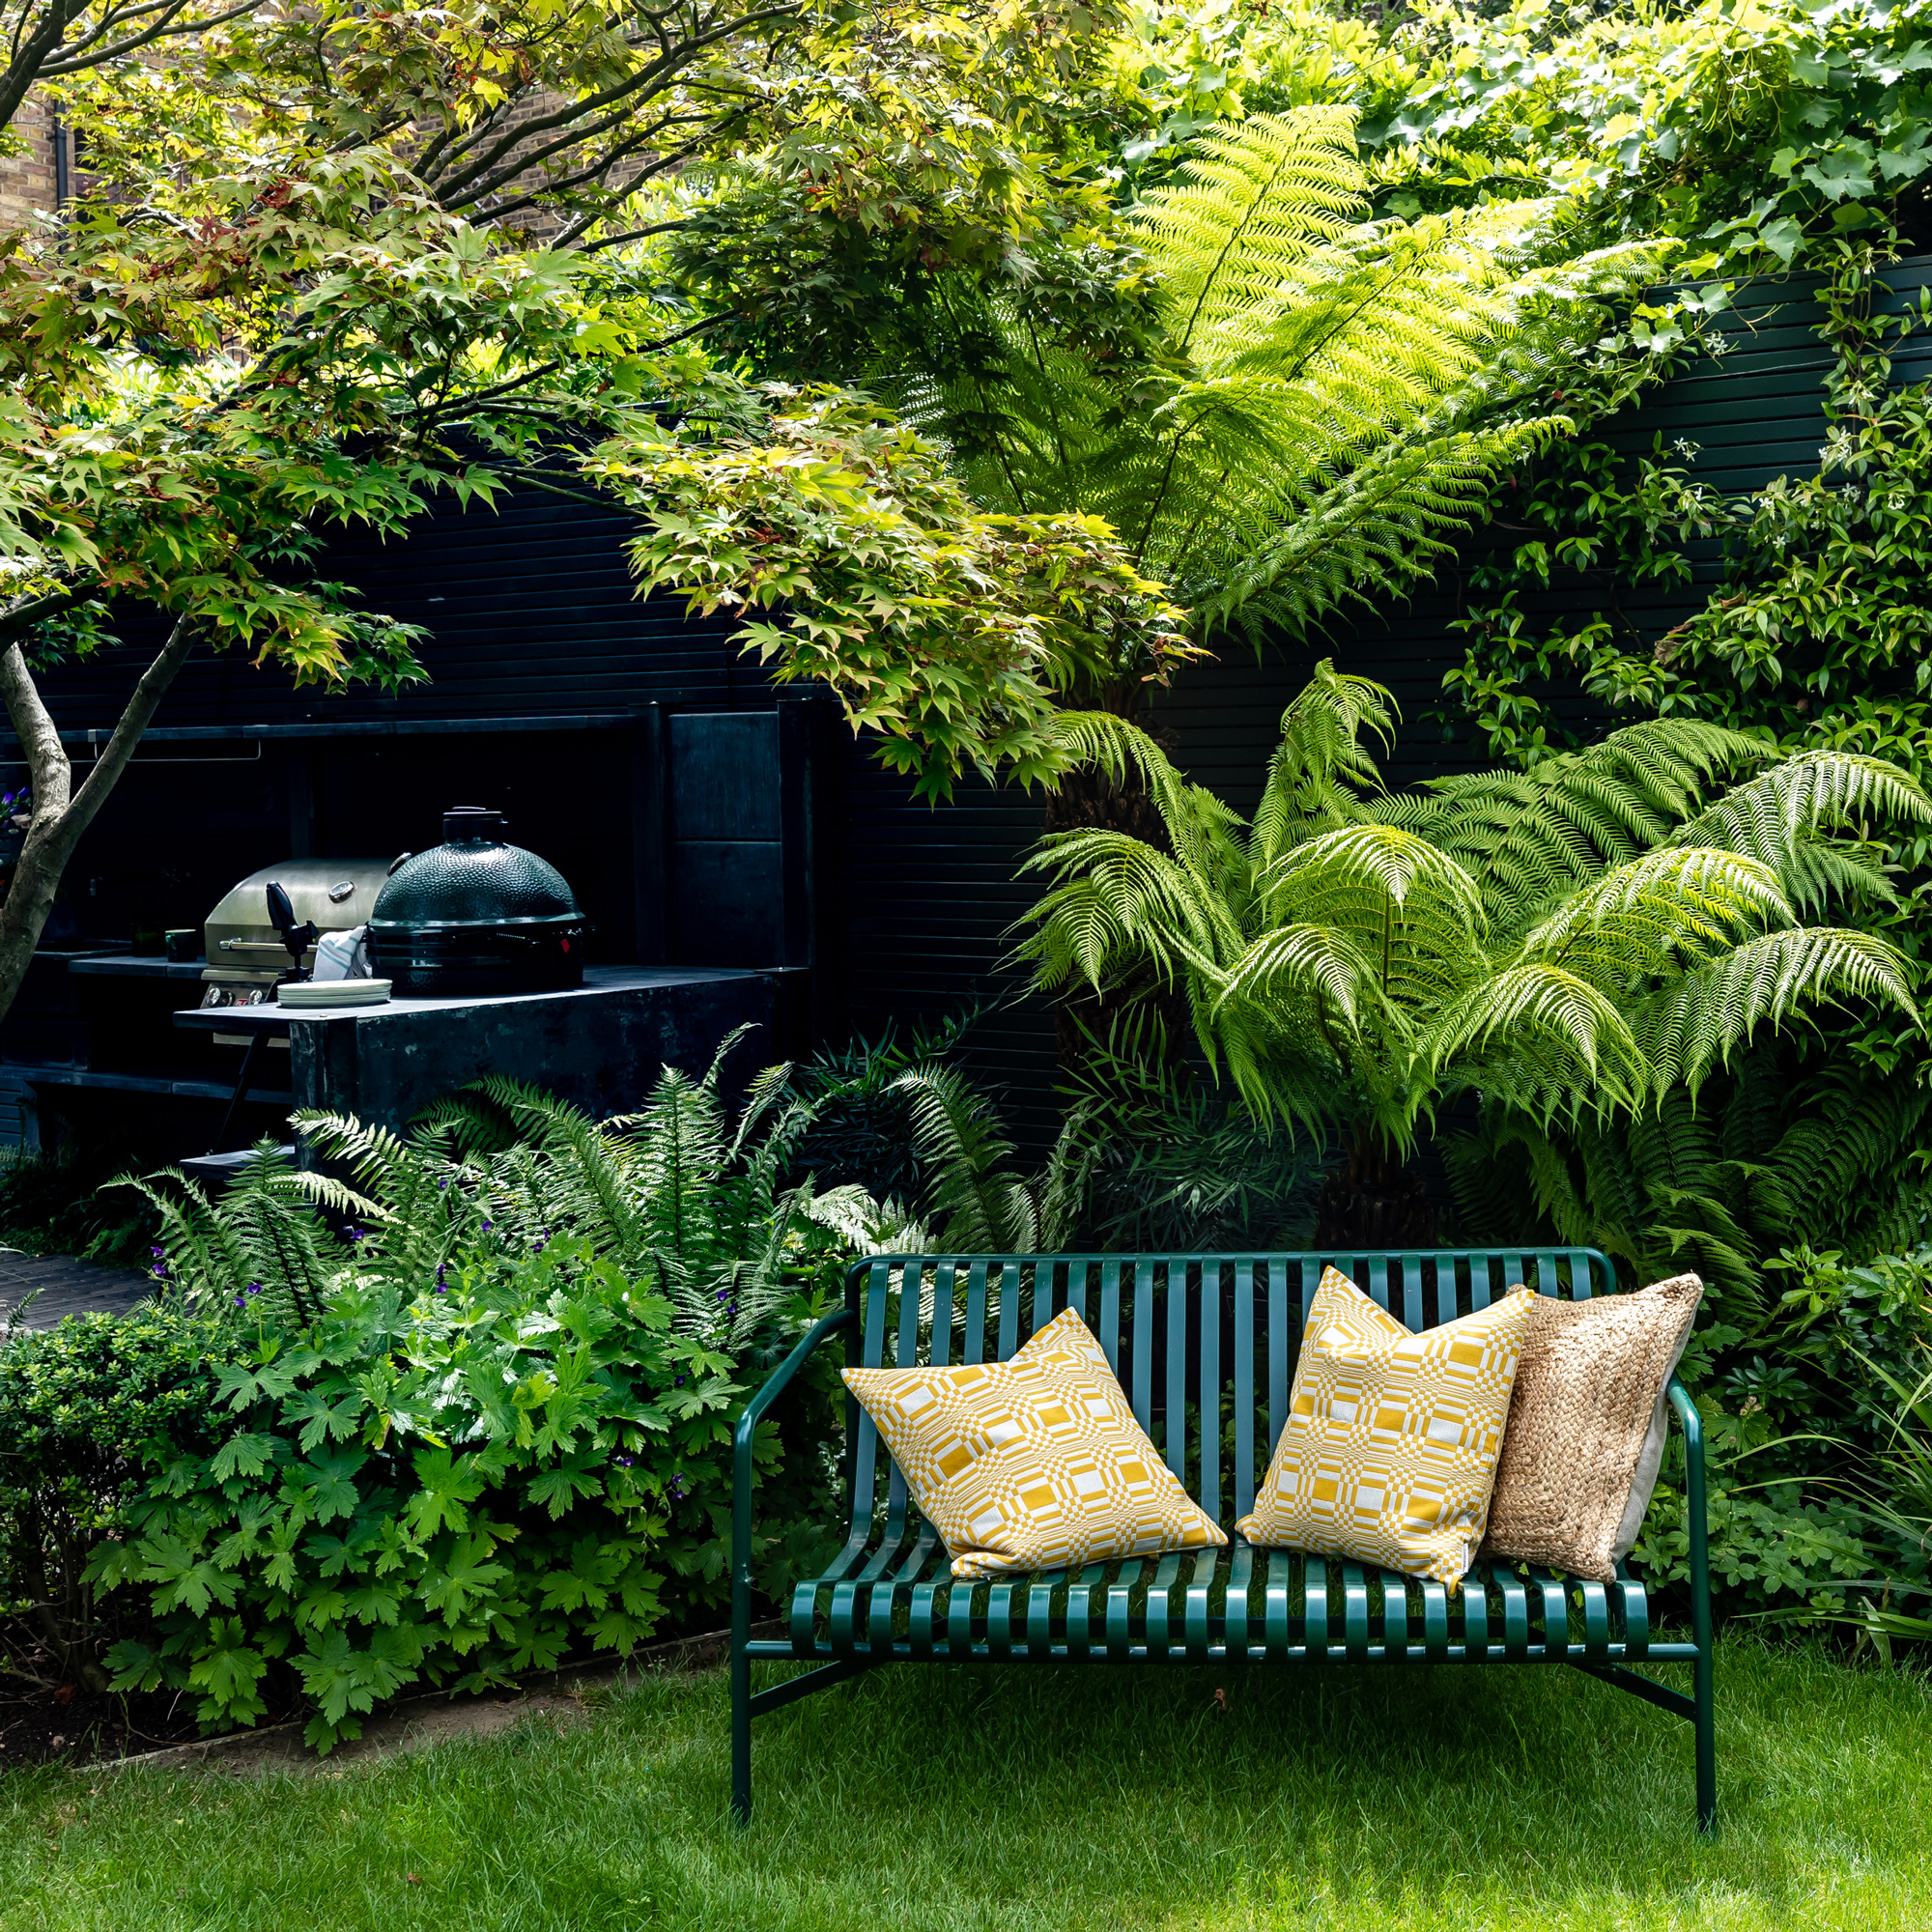 garden makeover with green bench, berbecues and tre ferns